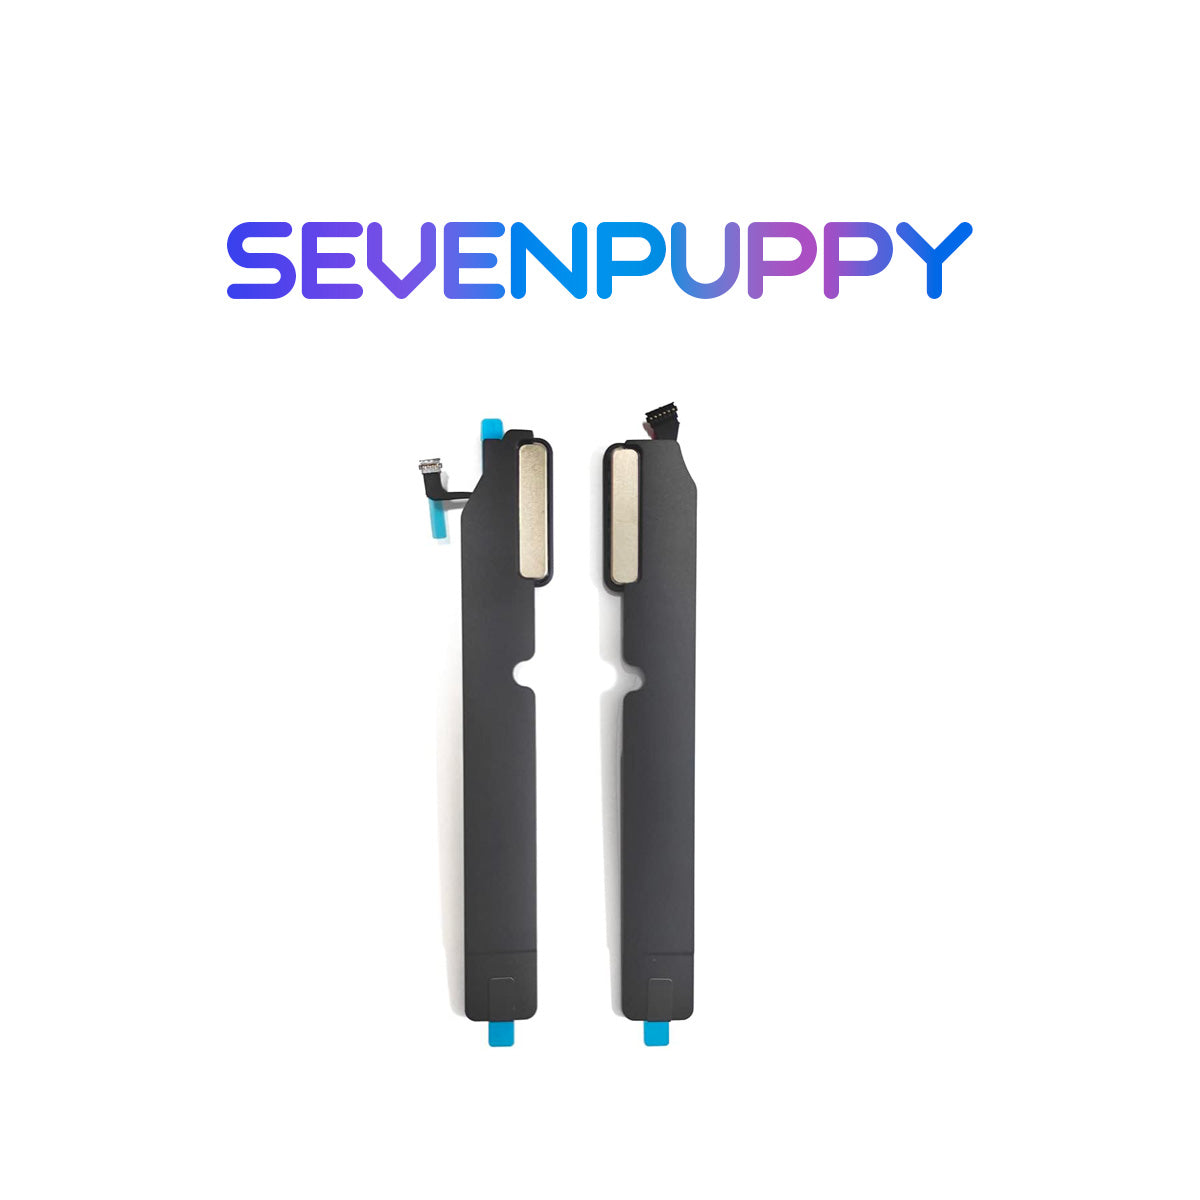 SEVEN PUPPY Brand NEW Left and Right Speaker Set Pair For Macbook Air 13" A1932 2018-2019 Year Internal Speaker